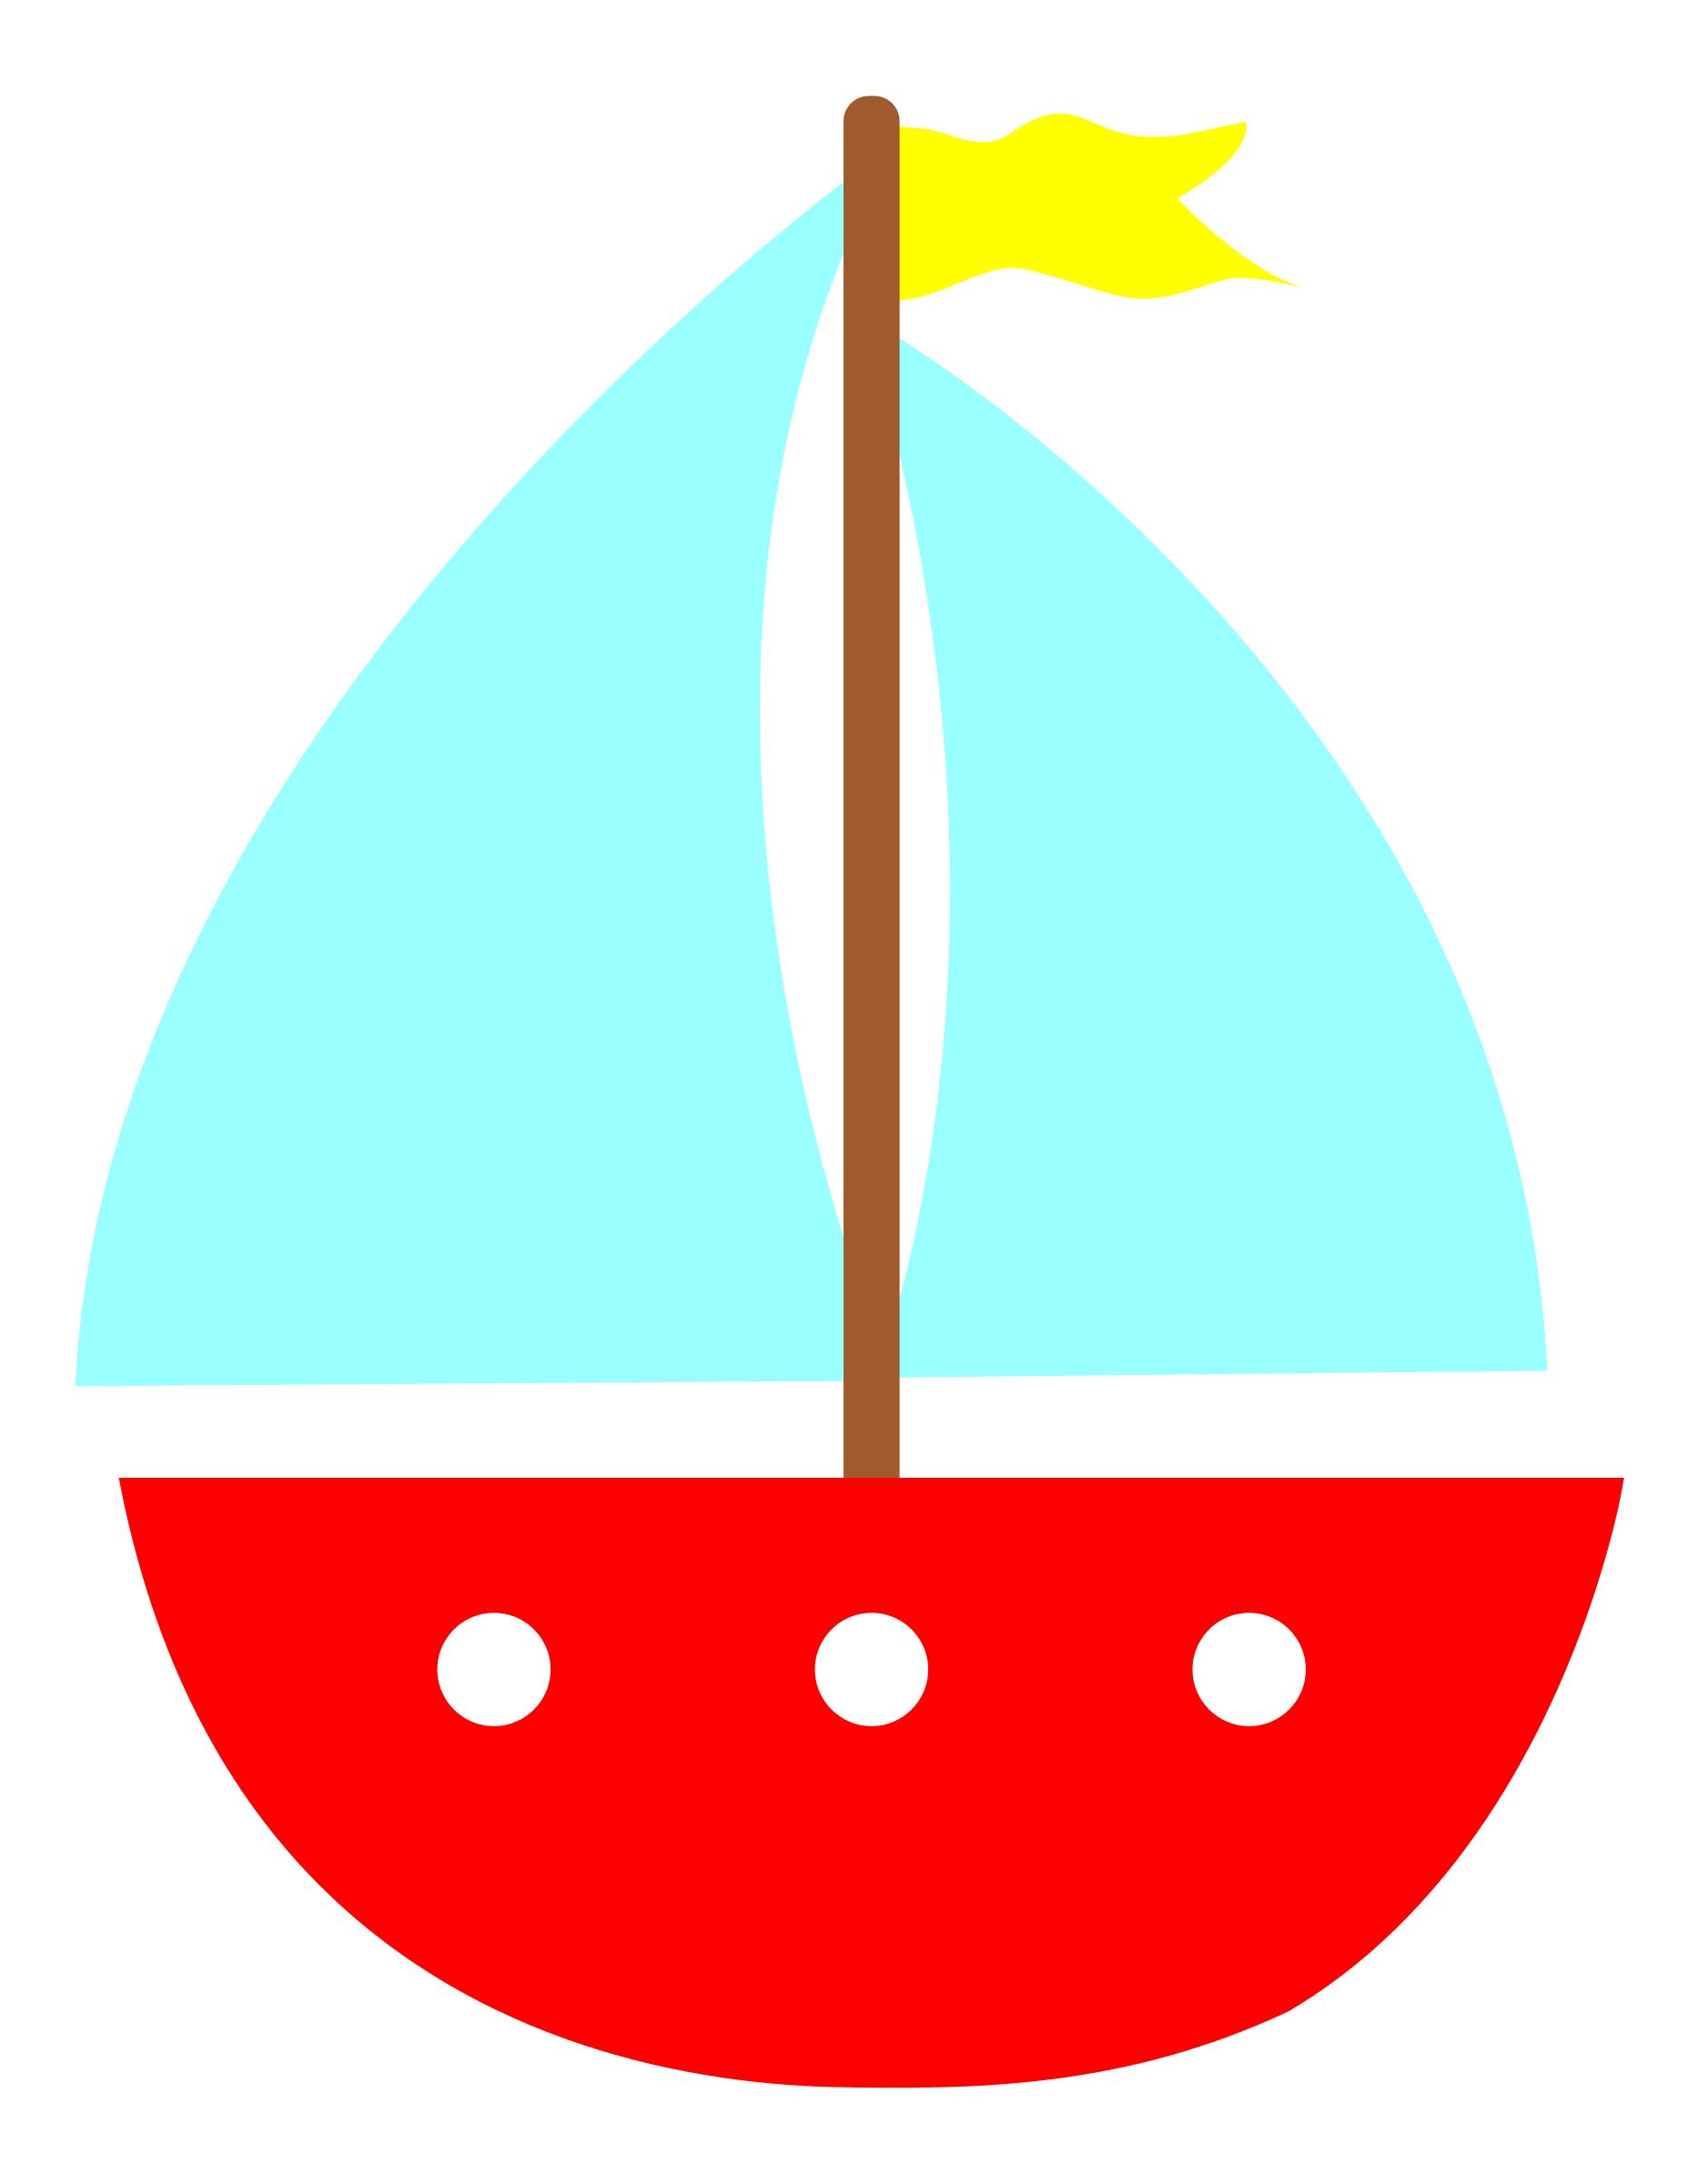 Sail at getdrawings com. Clipart boat silhouette